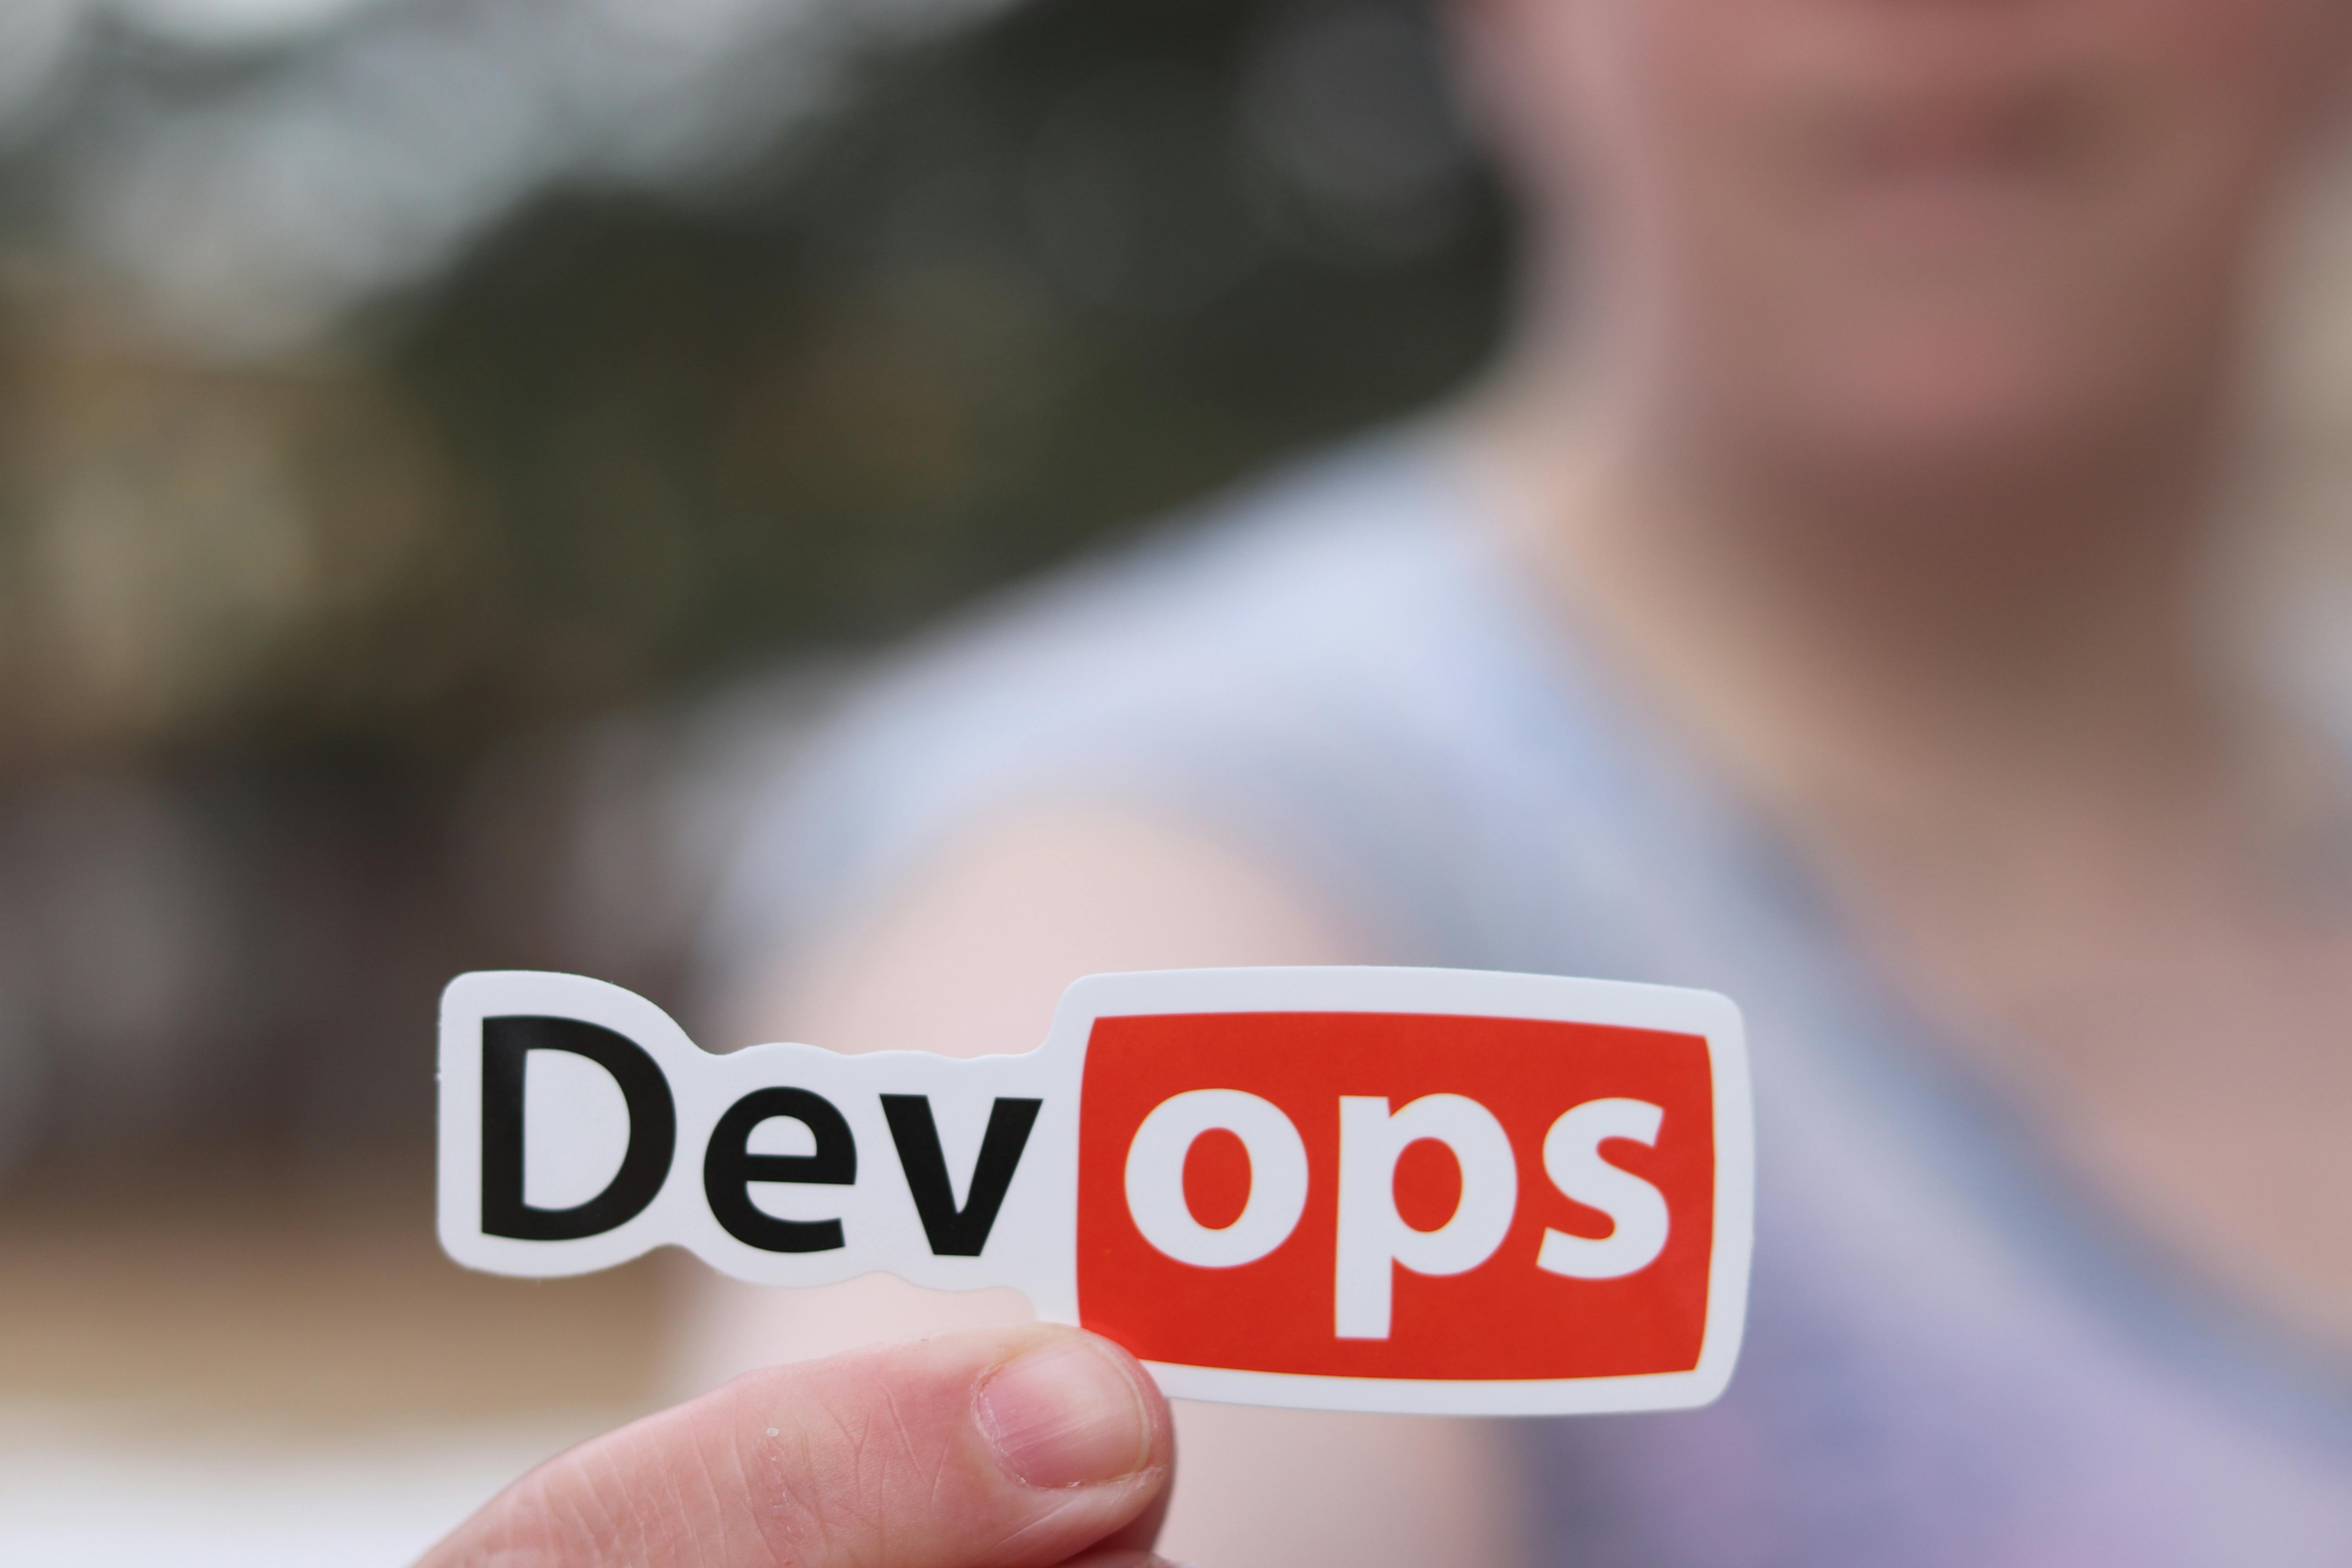 Code Deployment Tools: Automating Deployment With DevOps Tools And Practices. Popular Code Deployment Tools